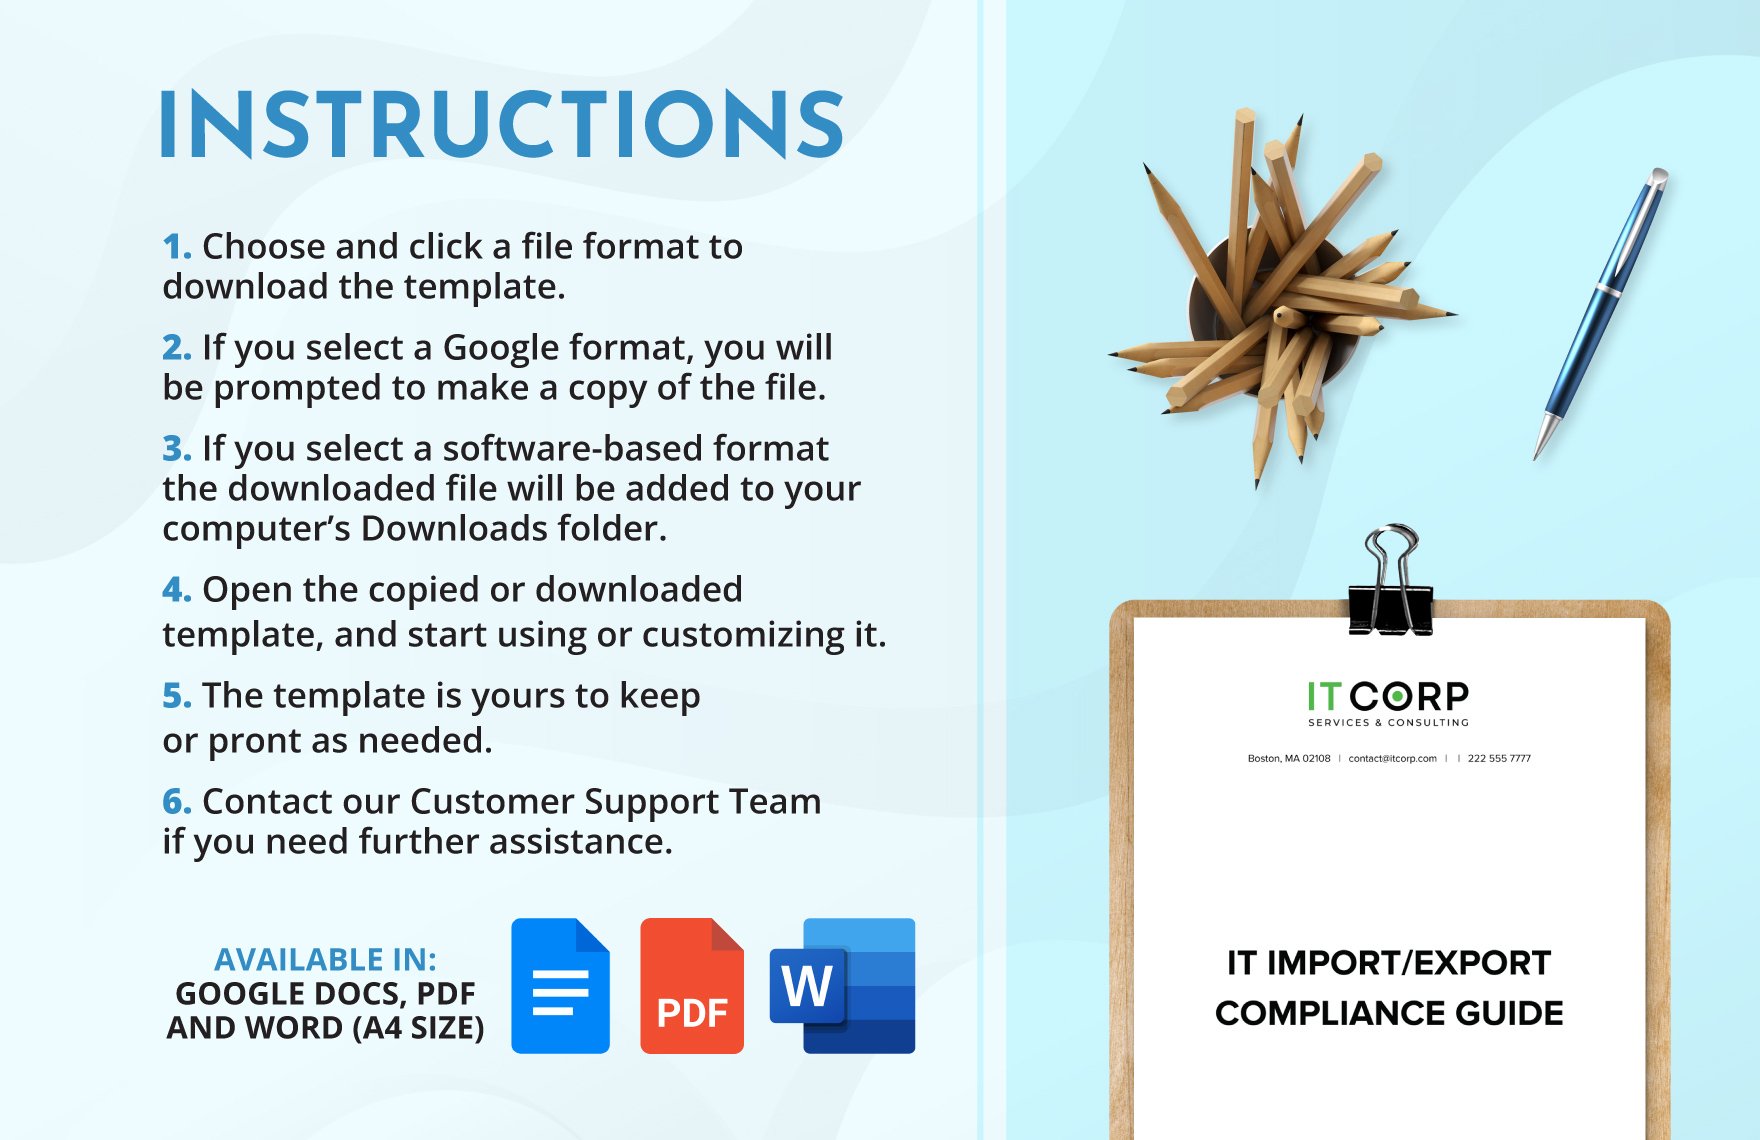 IT Import/Export Compliance Guide Template